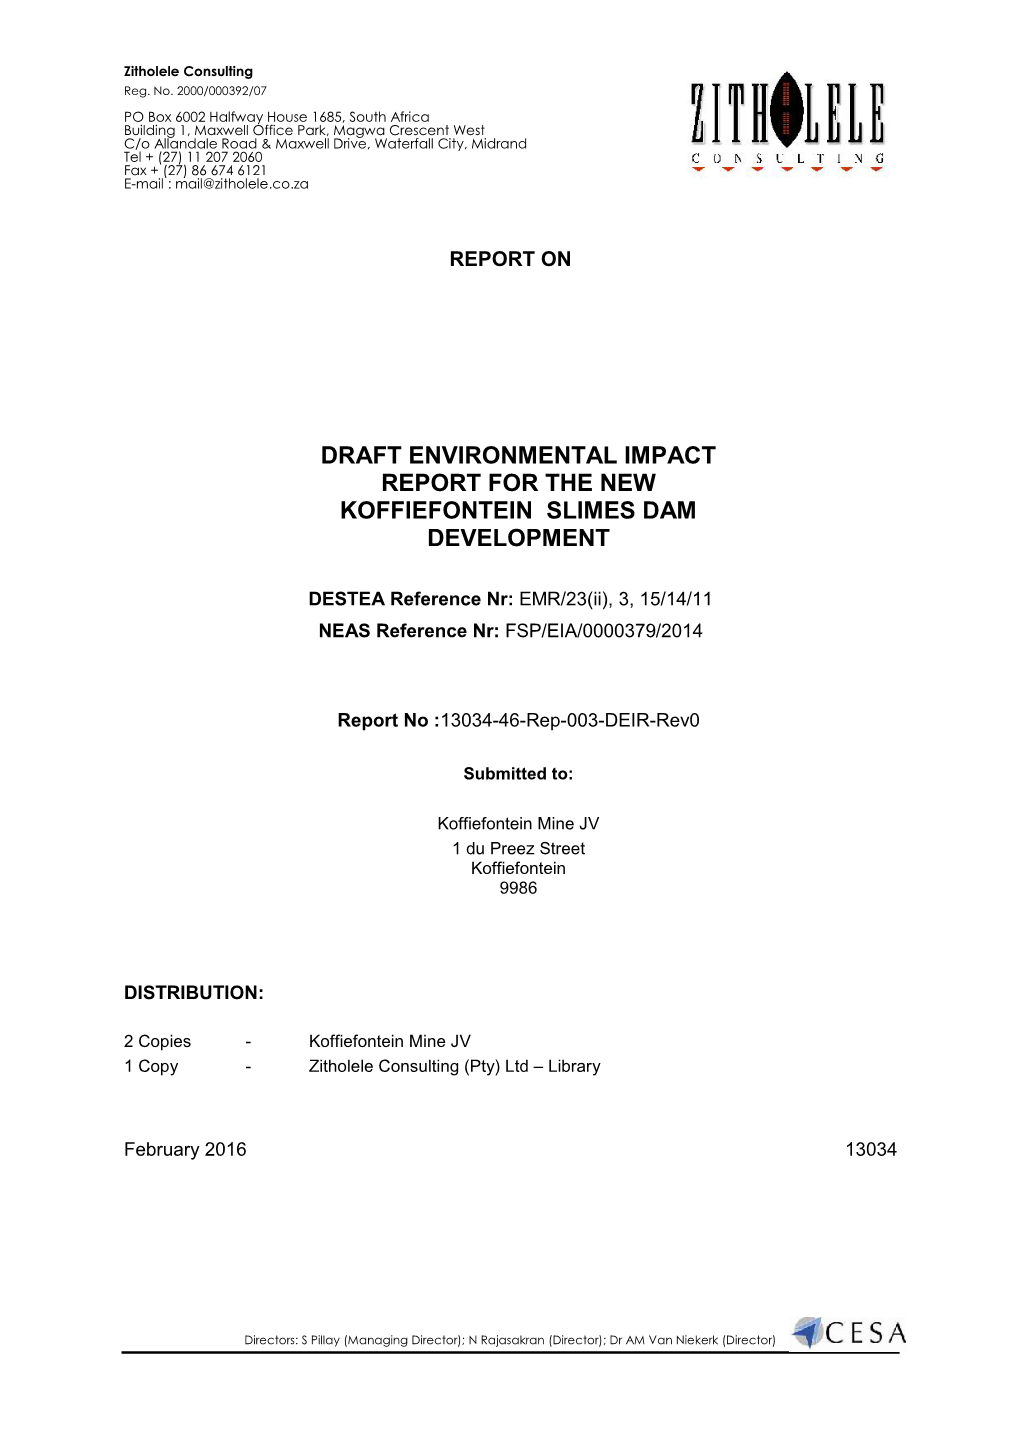 Draft Environmental Impact Report for the New Koffiefontein Slimes Dam Development